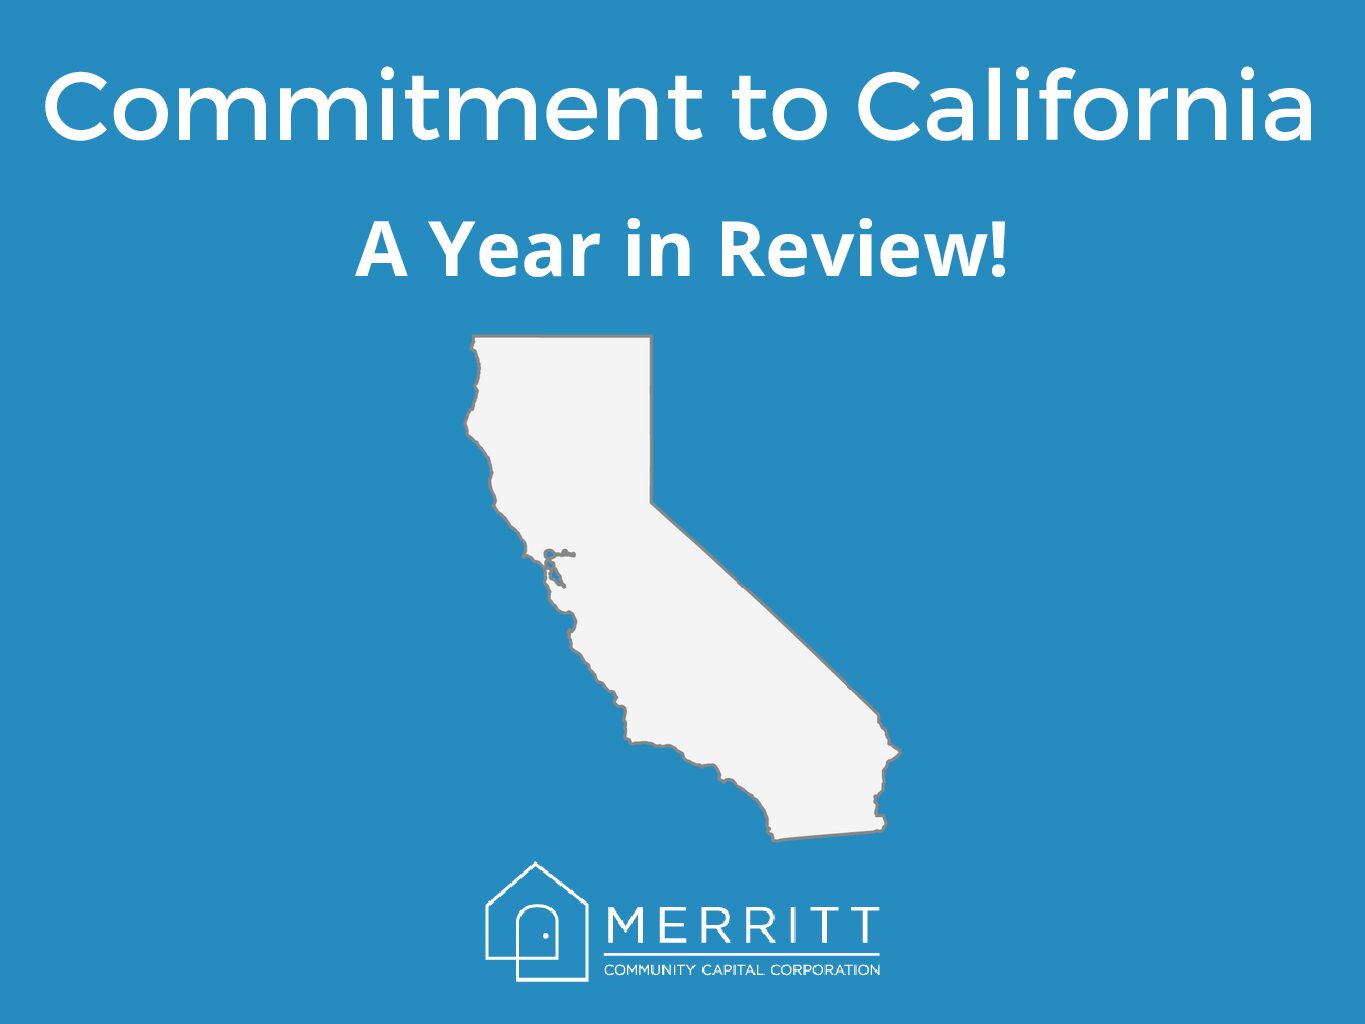 Commitment to California: A Year in Review